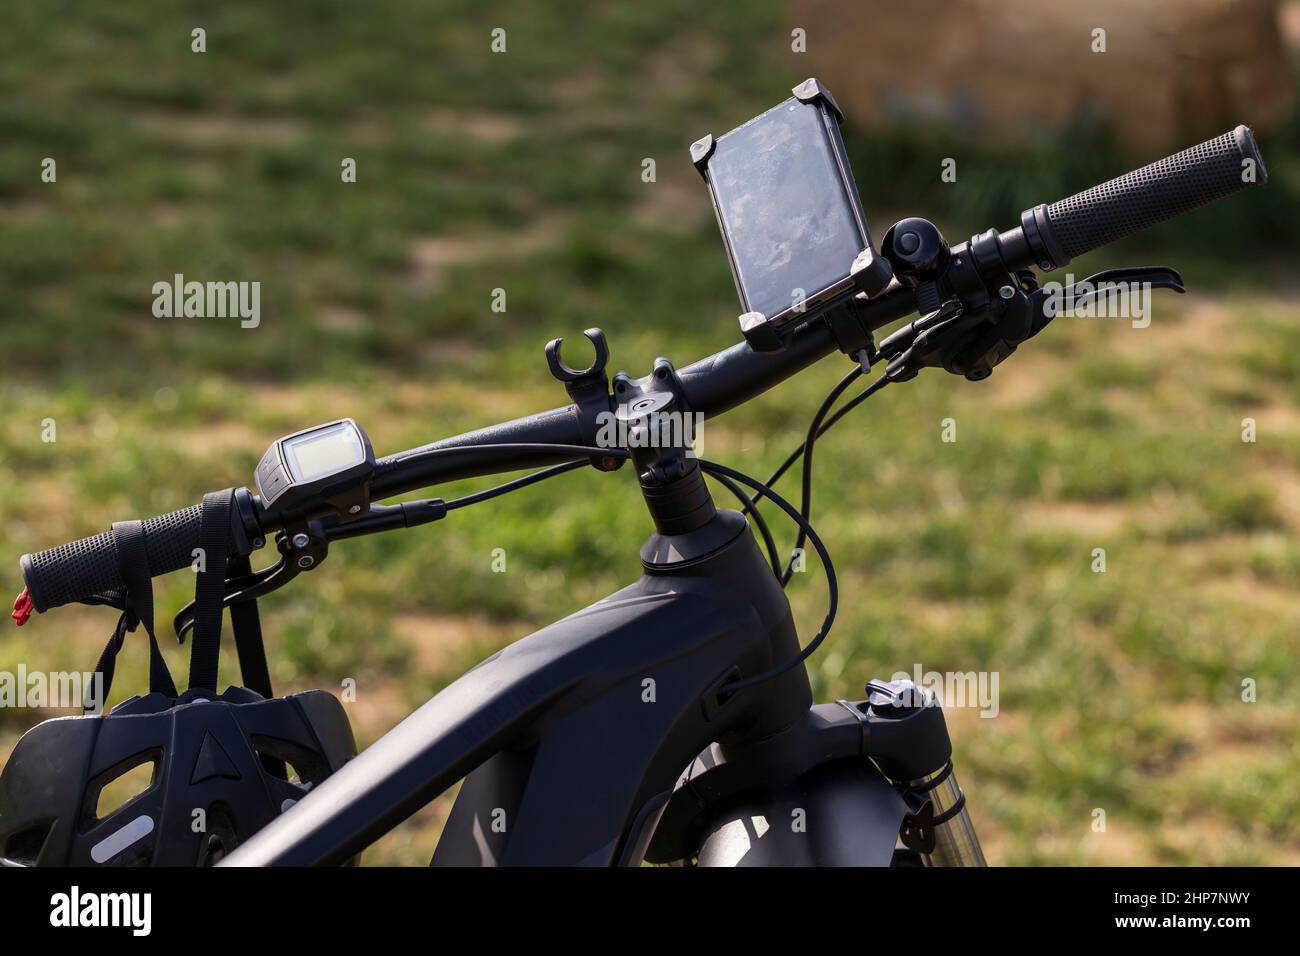 Electric bicycle handlebars. A navigation computer is attached to the handlebars and a bicycle helmet hangs on them. Stock Photo